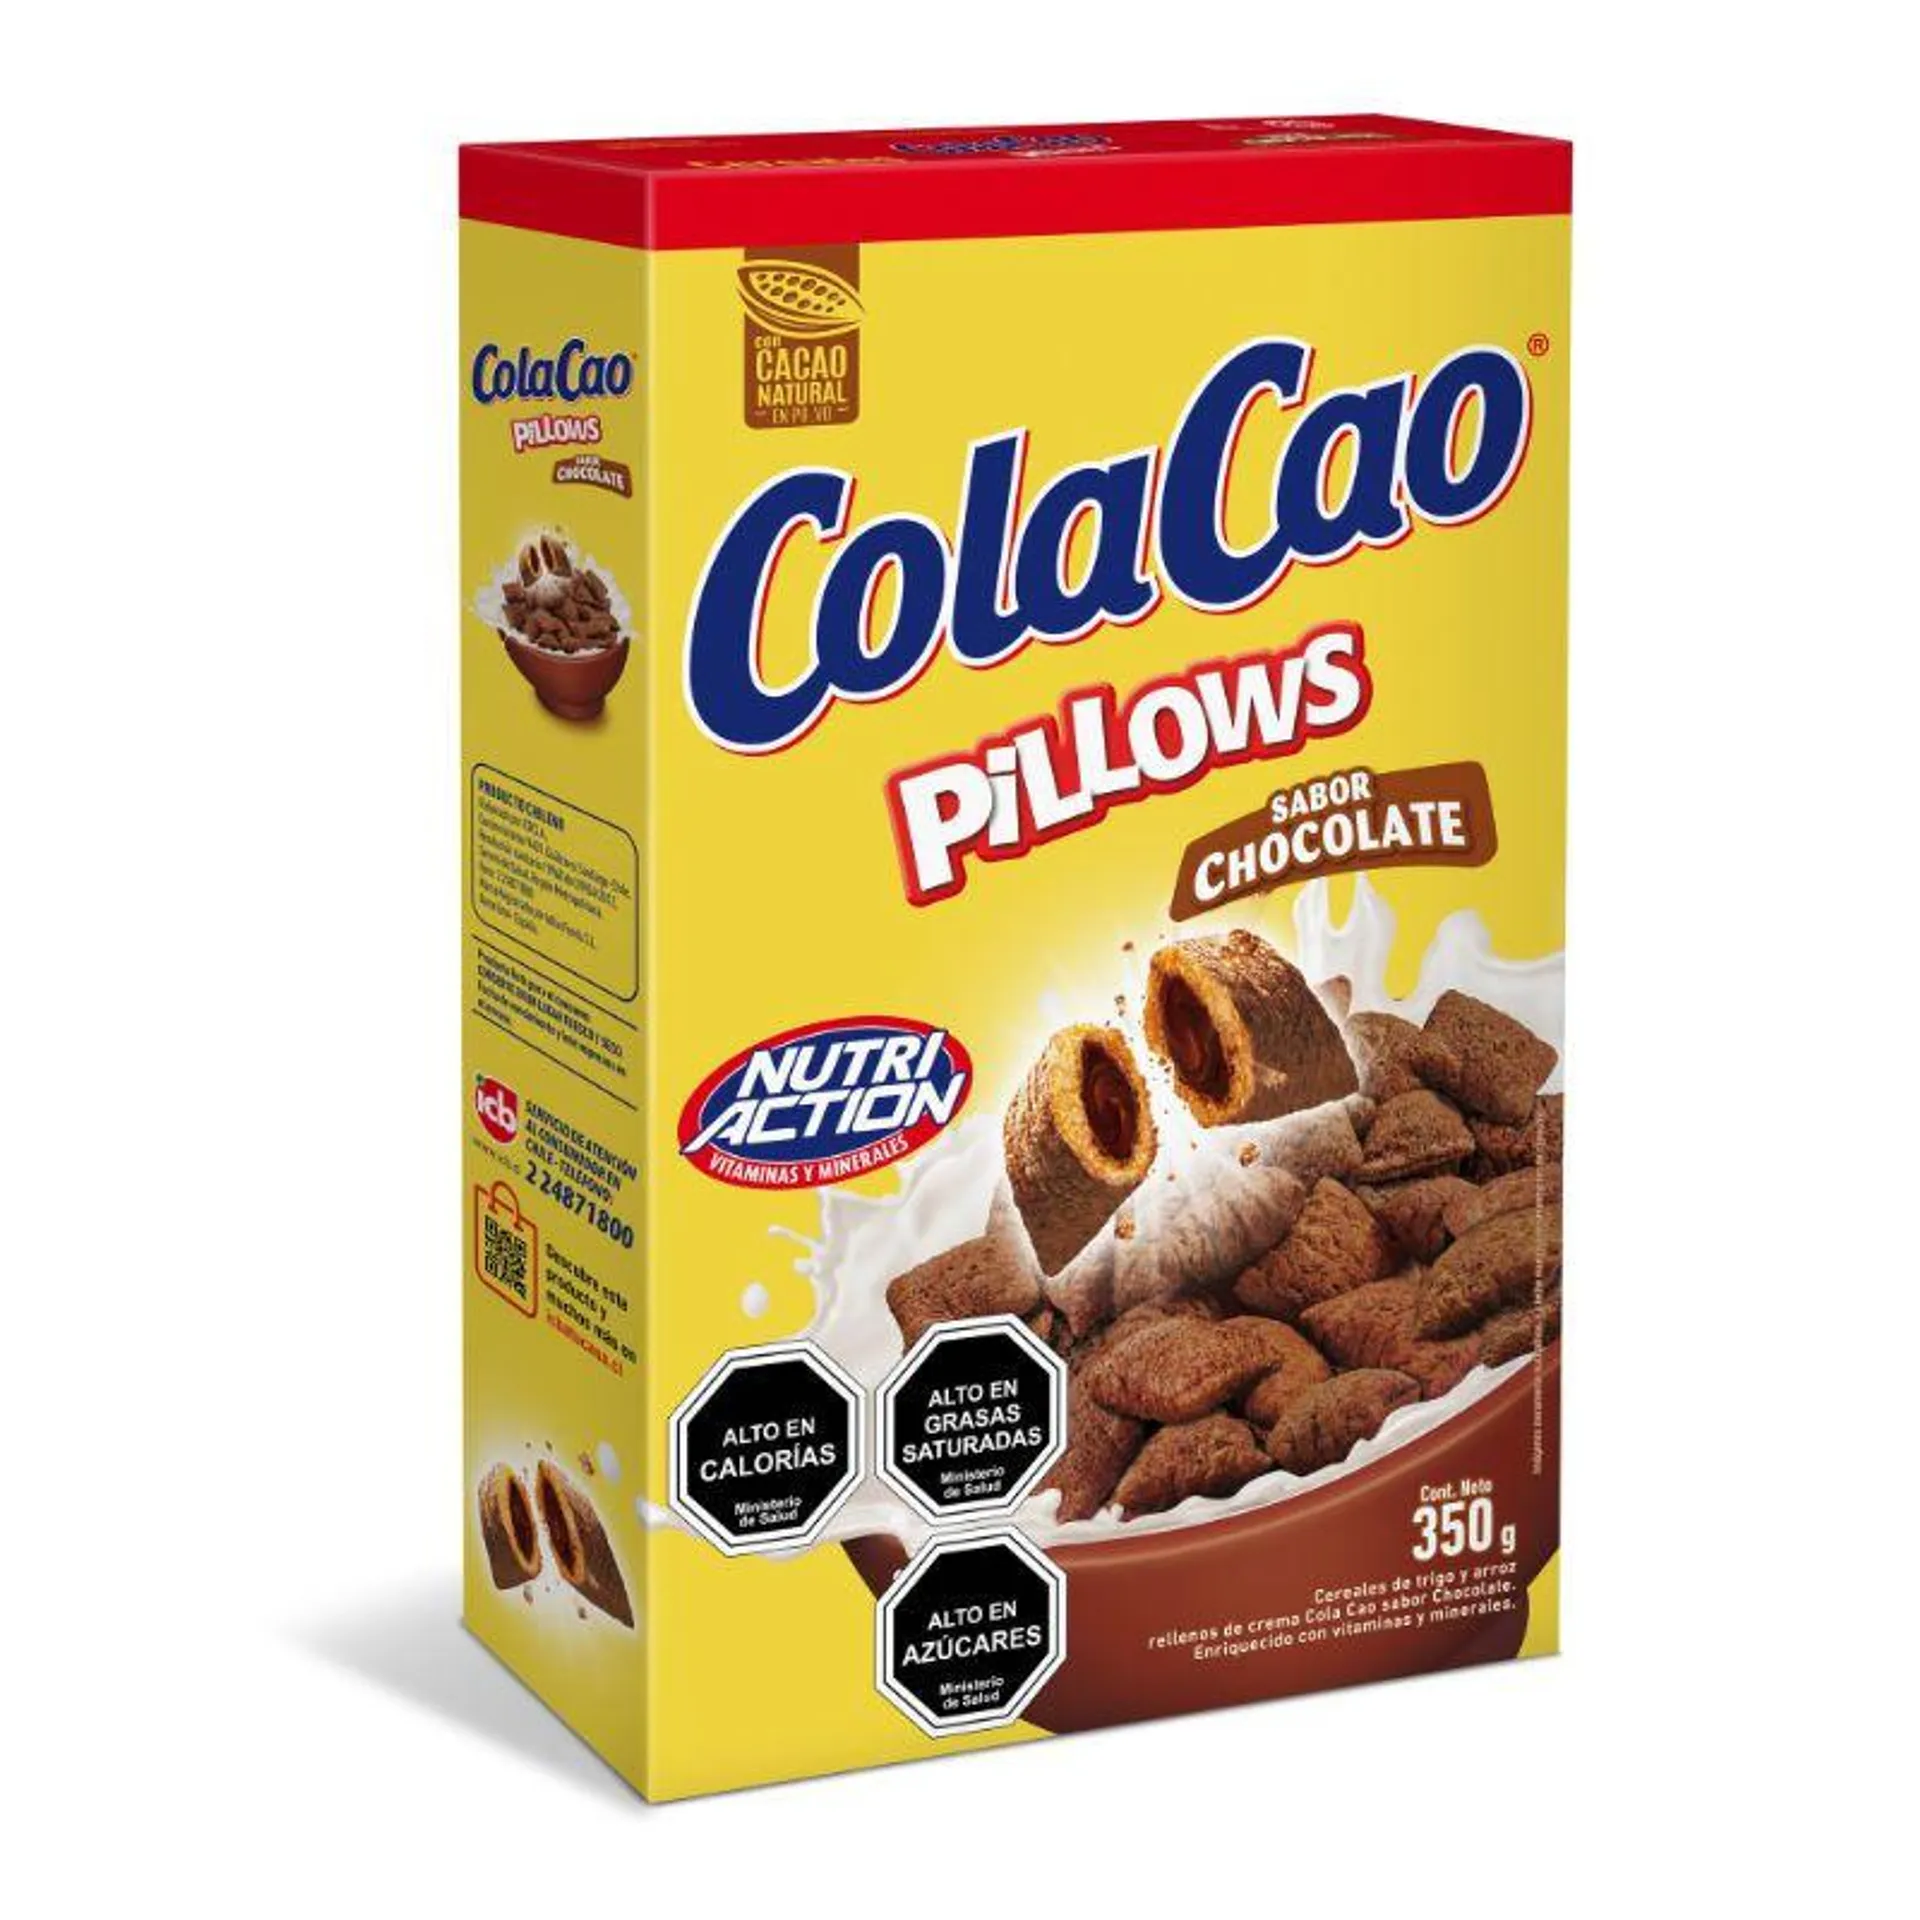 Cereales Pillows Sabor Chocolate, 350 g